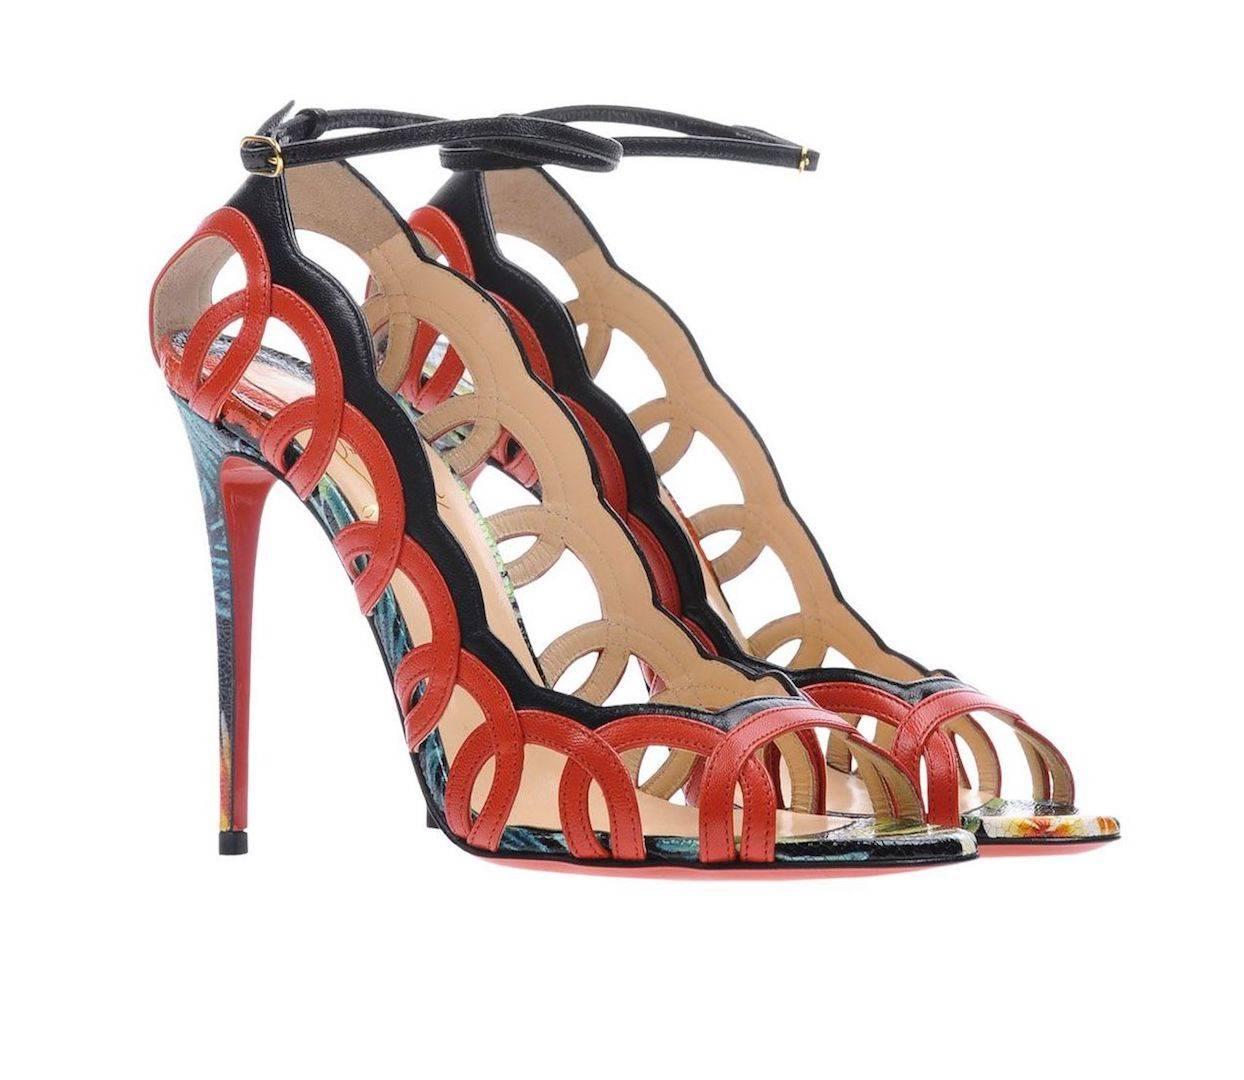 CURATOR'S NOTES

Christian Louboutin NEW Red Leather Flower Cut Out Heels Pumps in Box  

Size IT 36.5
Calfskin leather
Ankle strap closure
Made in Italy
Heel height 4.25